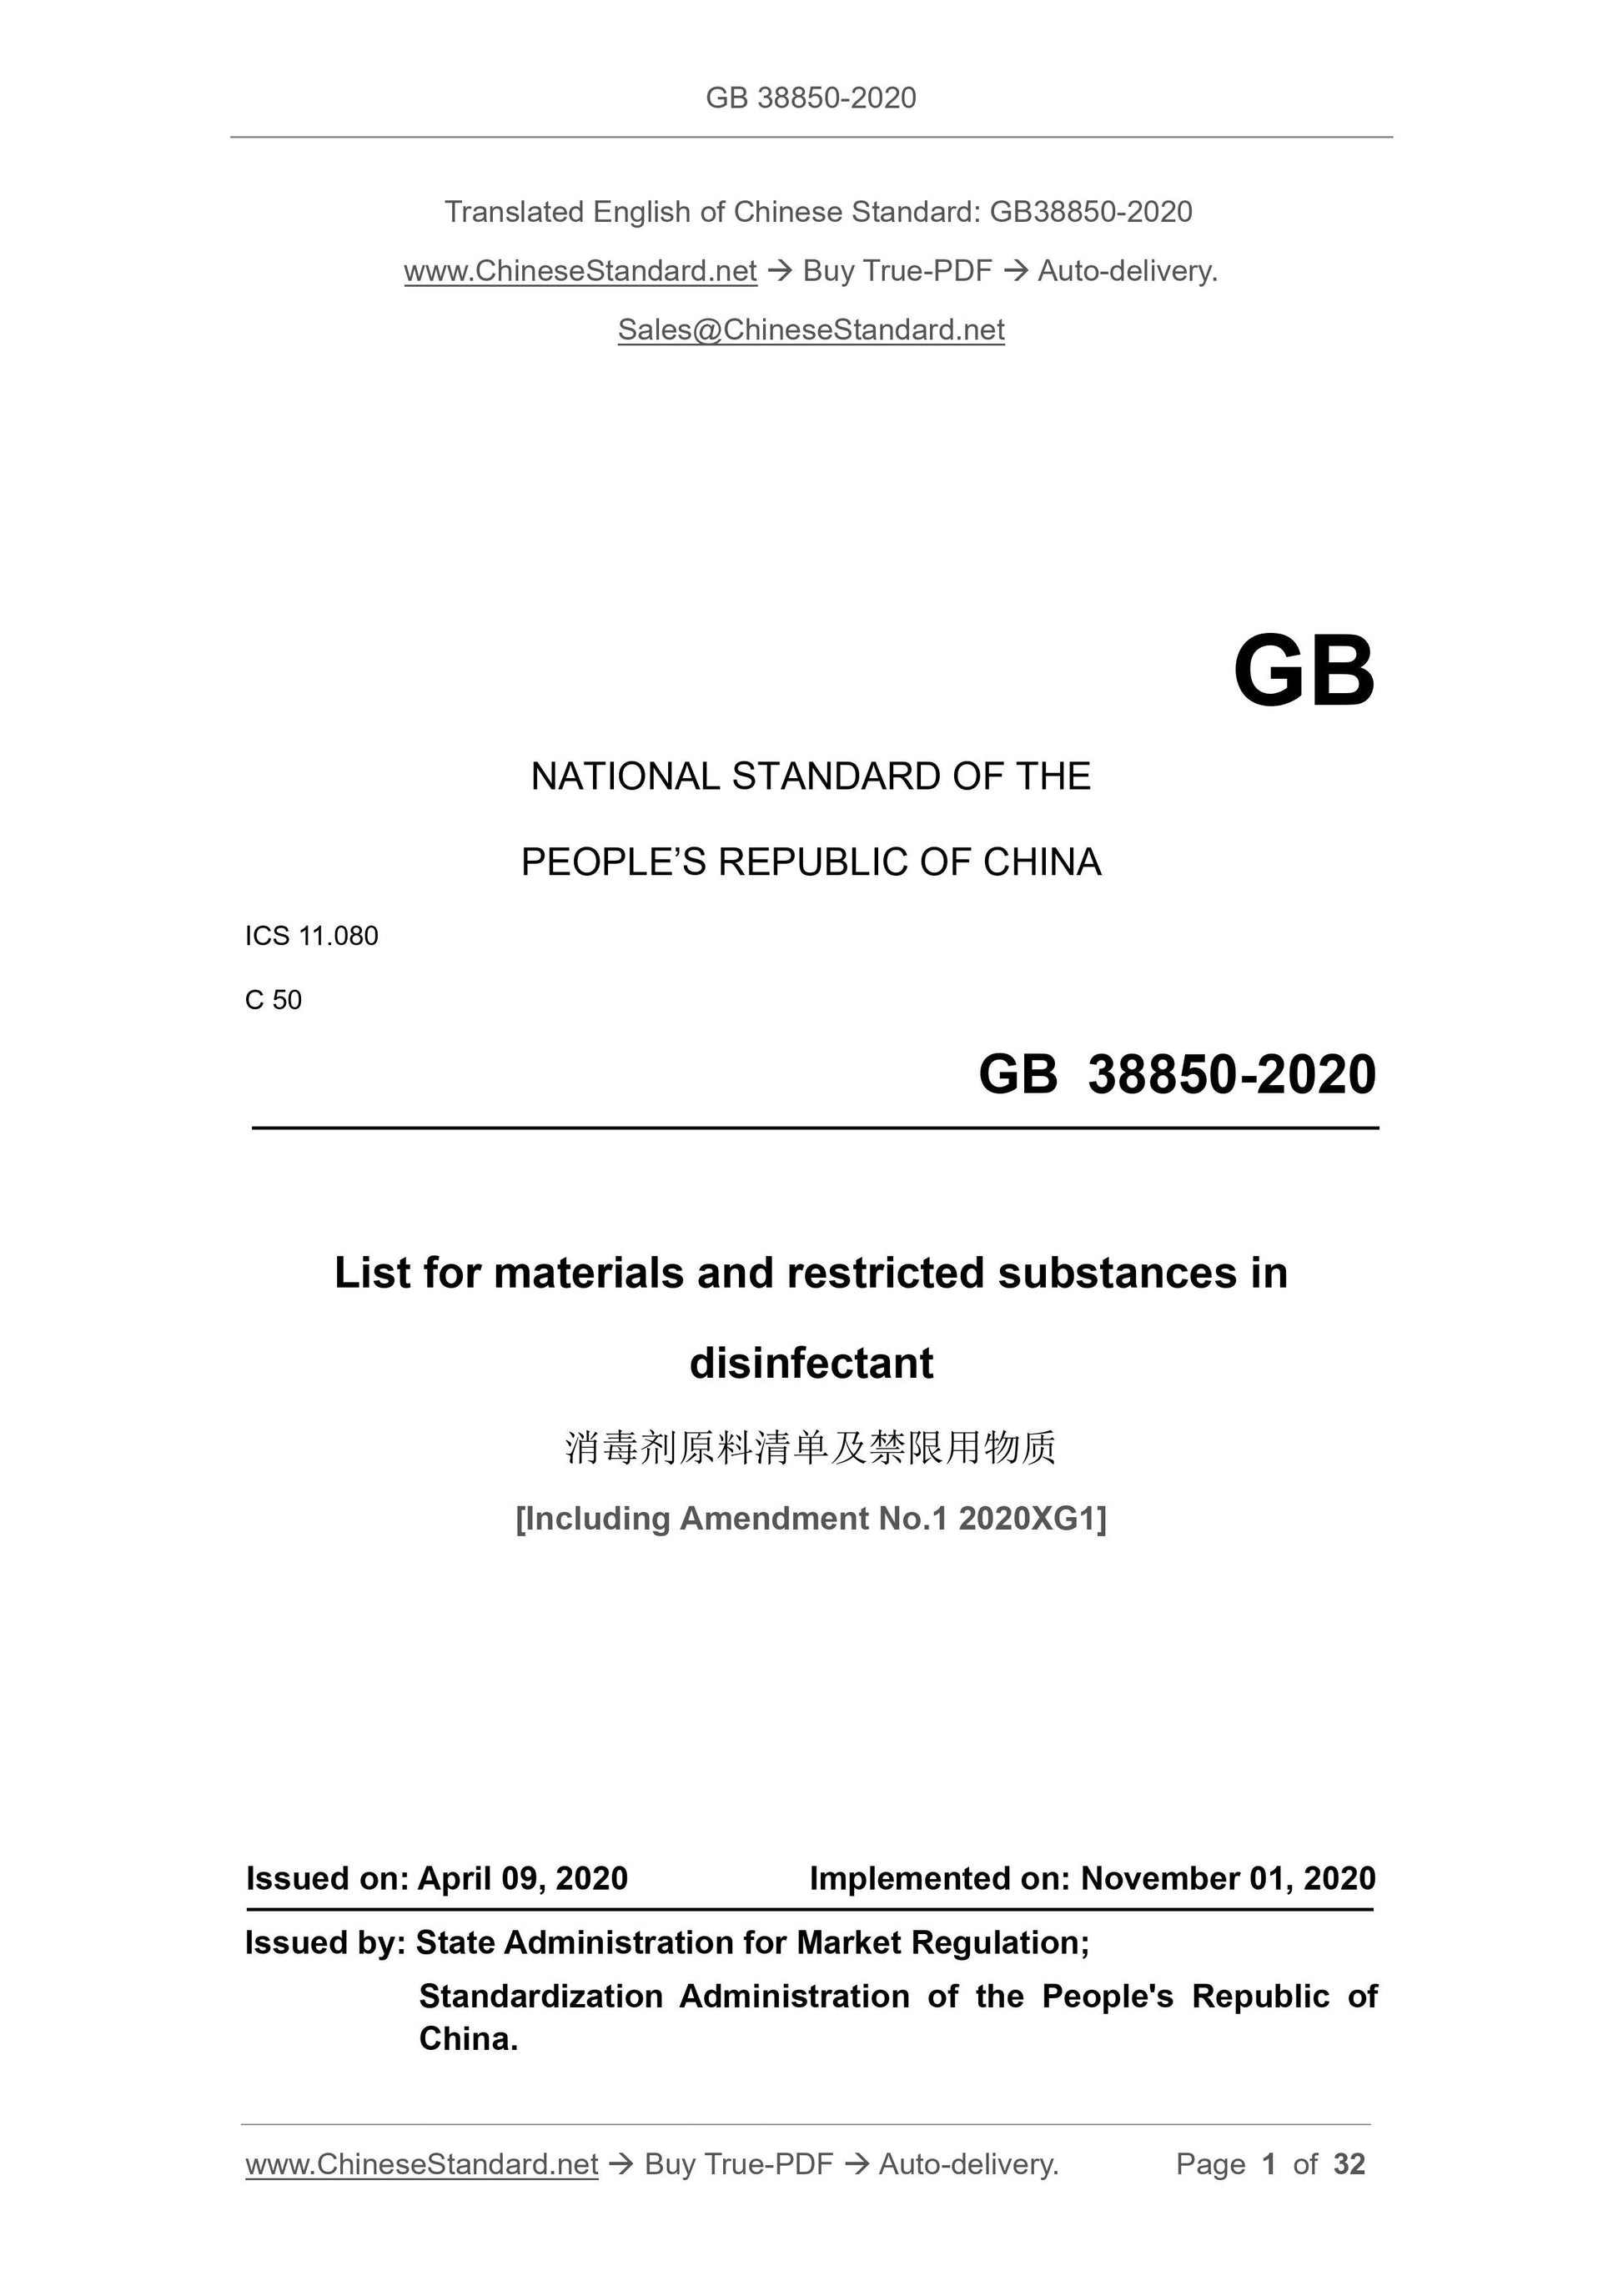 GB 38850-2020 Page 1